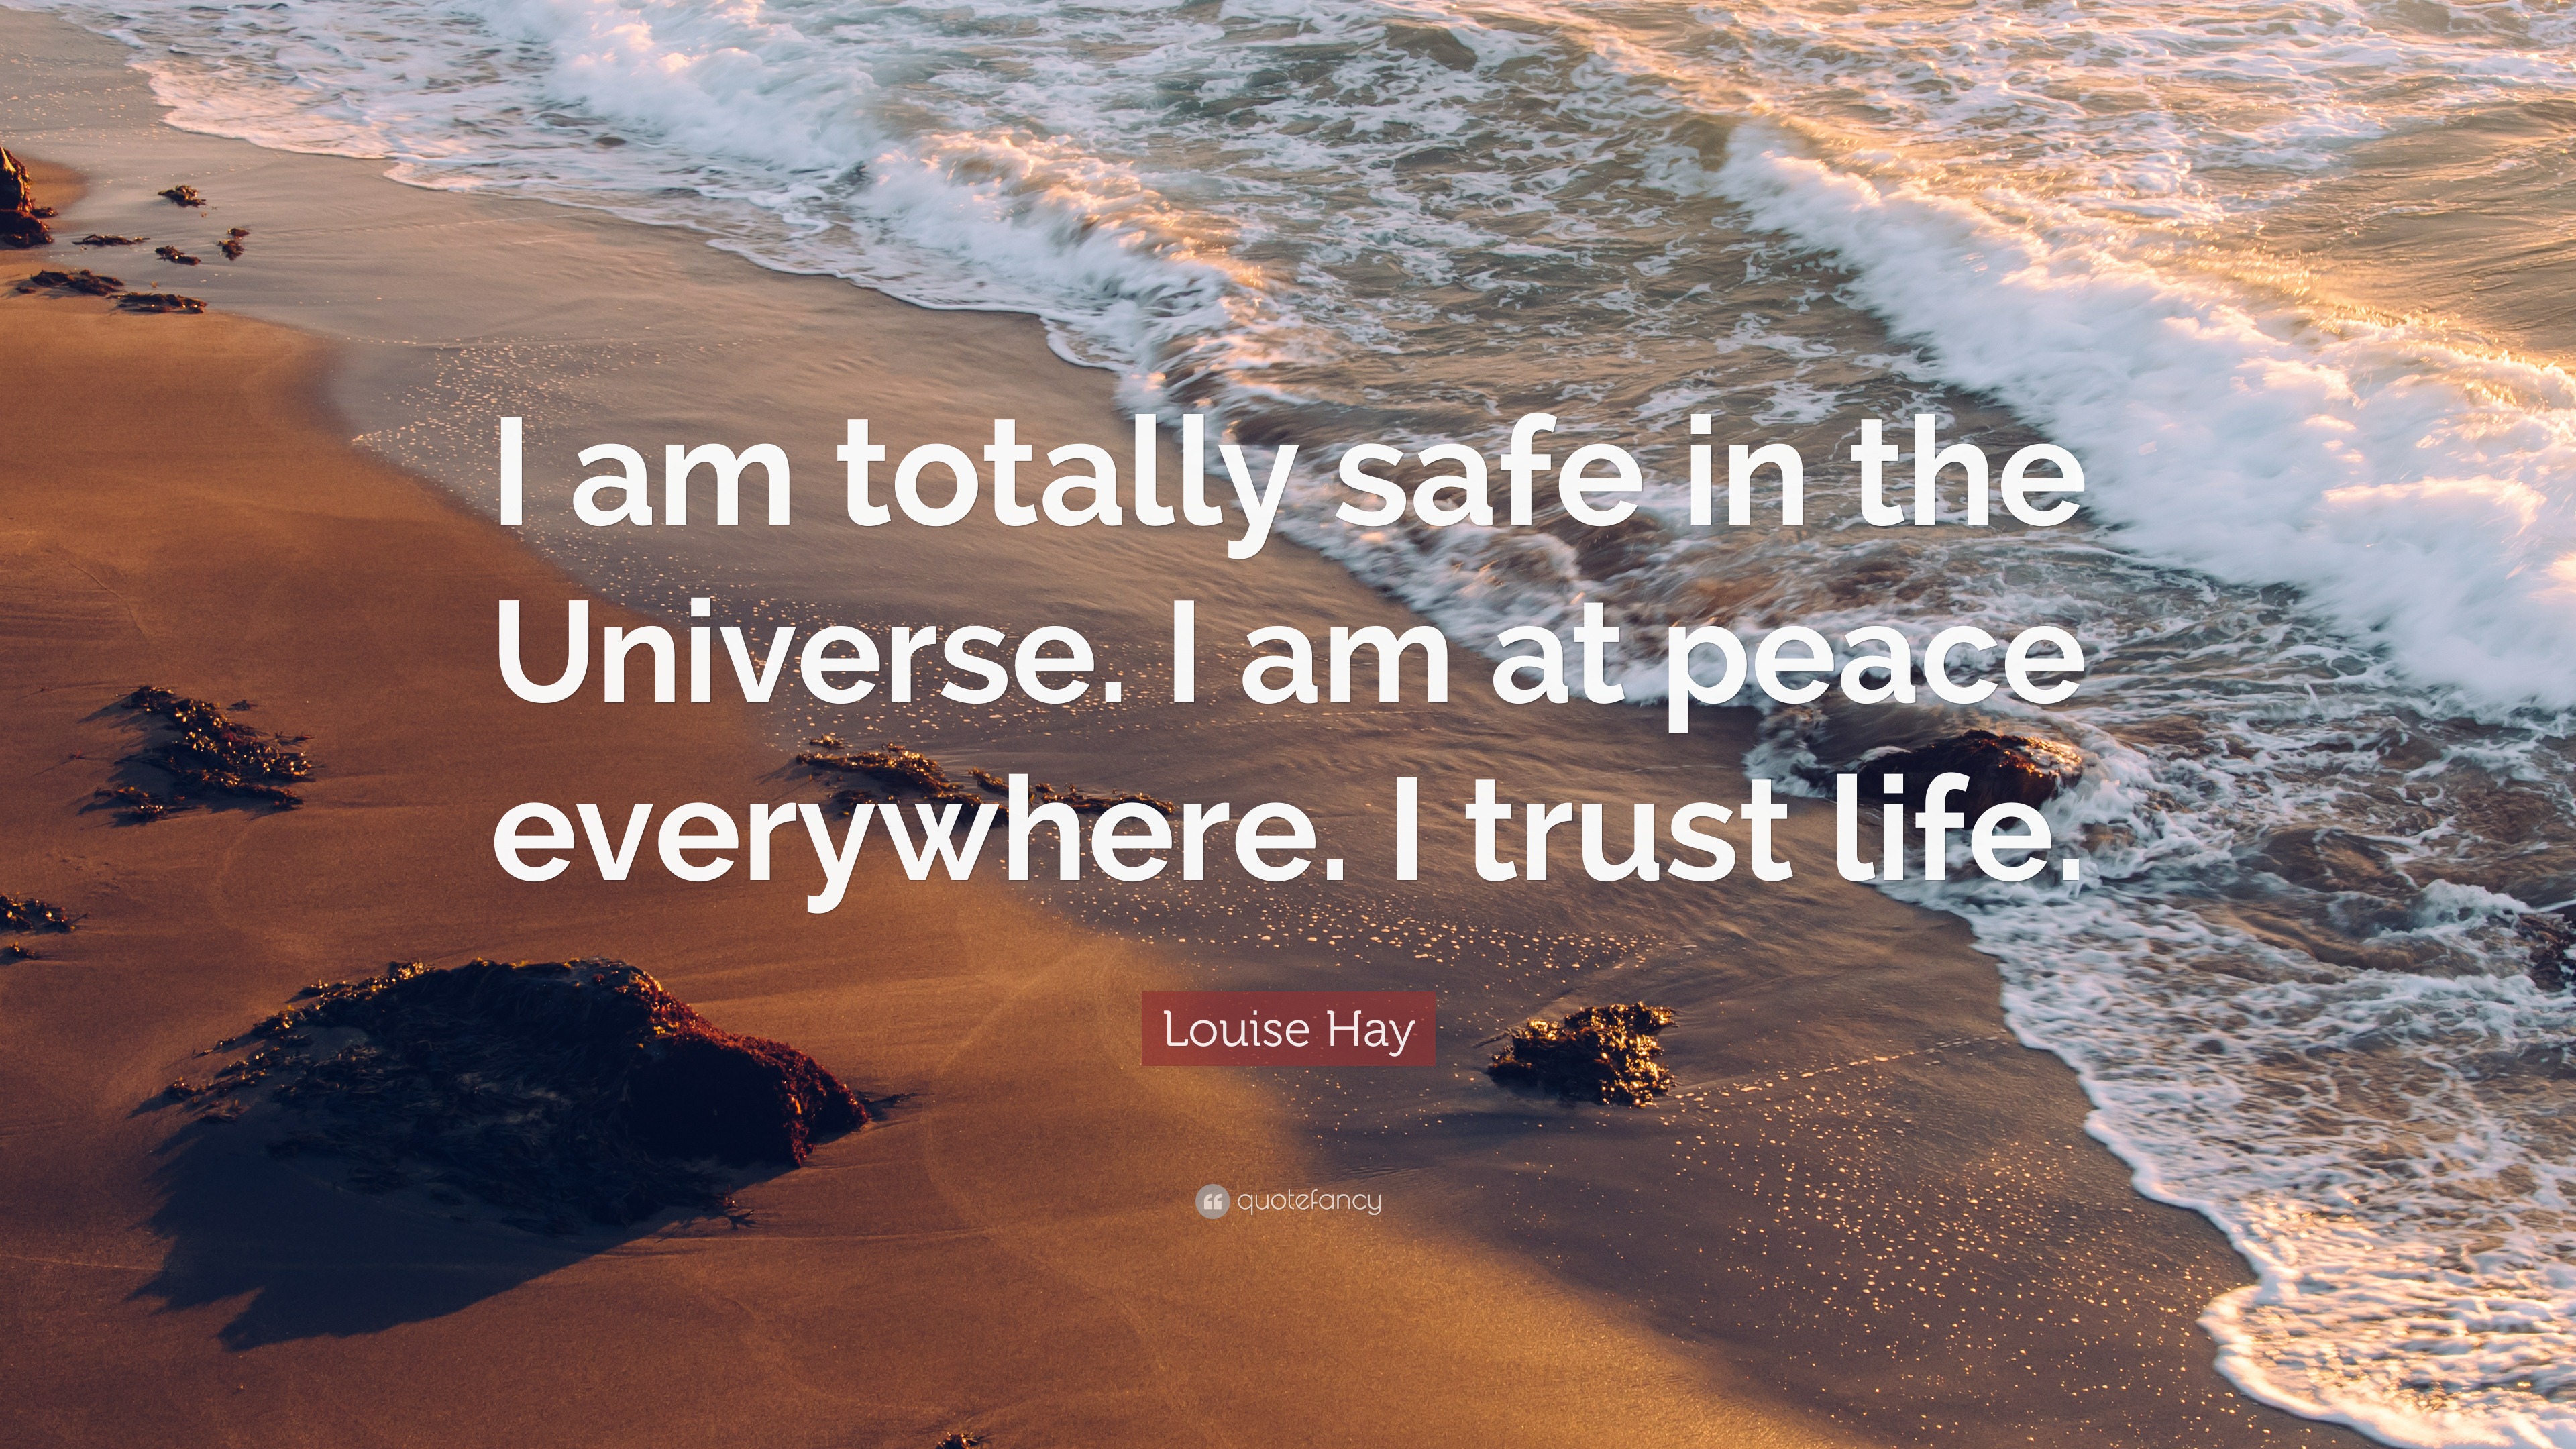 Louise Hay Quote: “I am totally safe in the Universe. I am at peace  everywhere. I